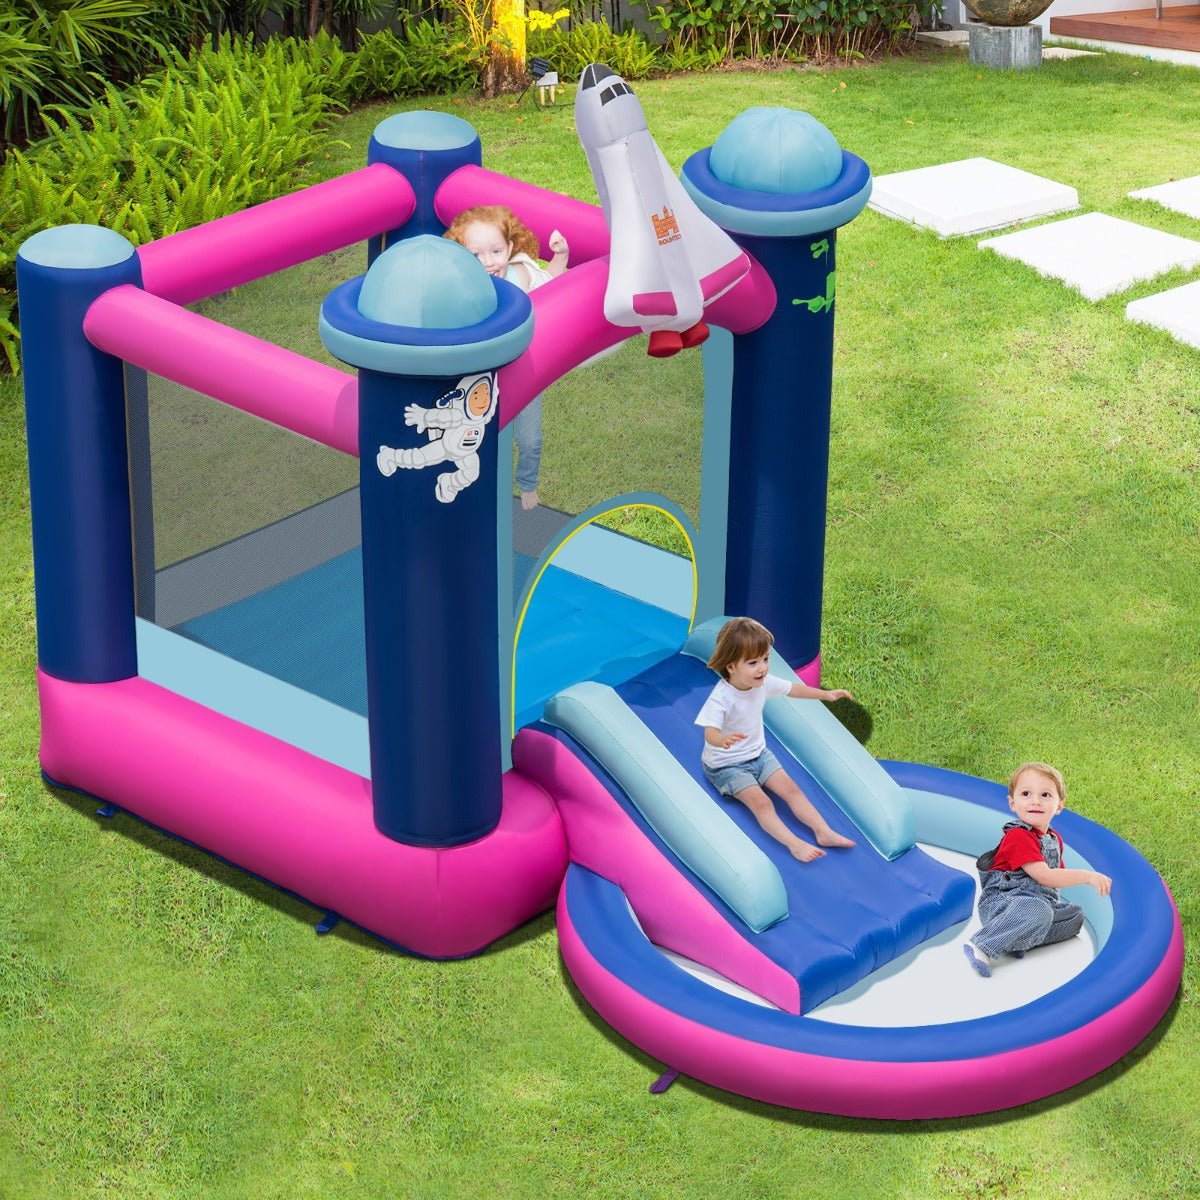 Space-Themed Jumping House with Slide - Cosmic Excitement for Kids